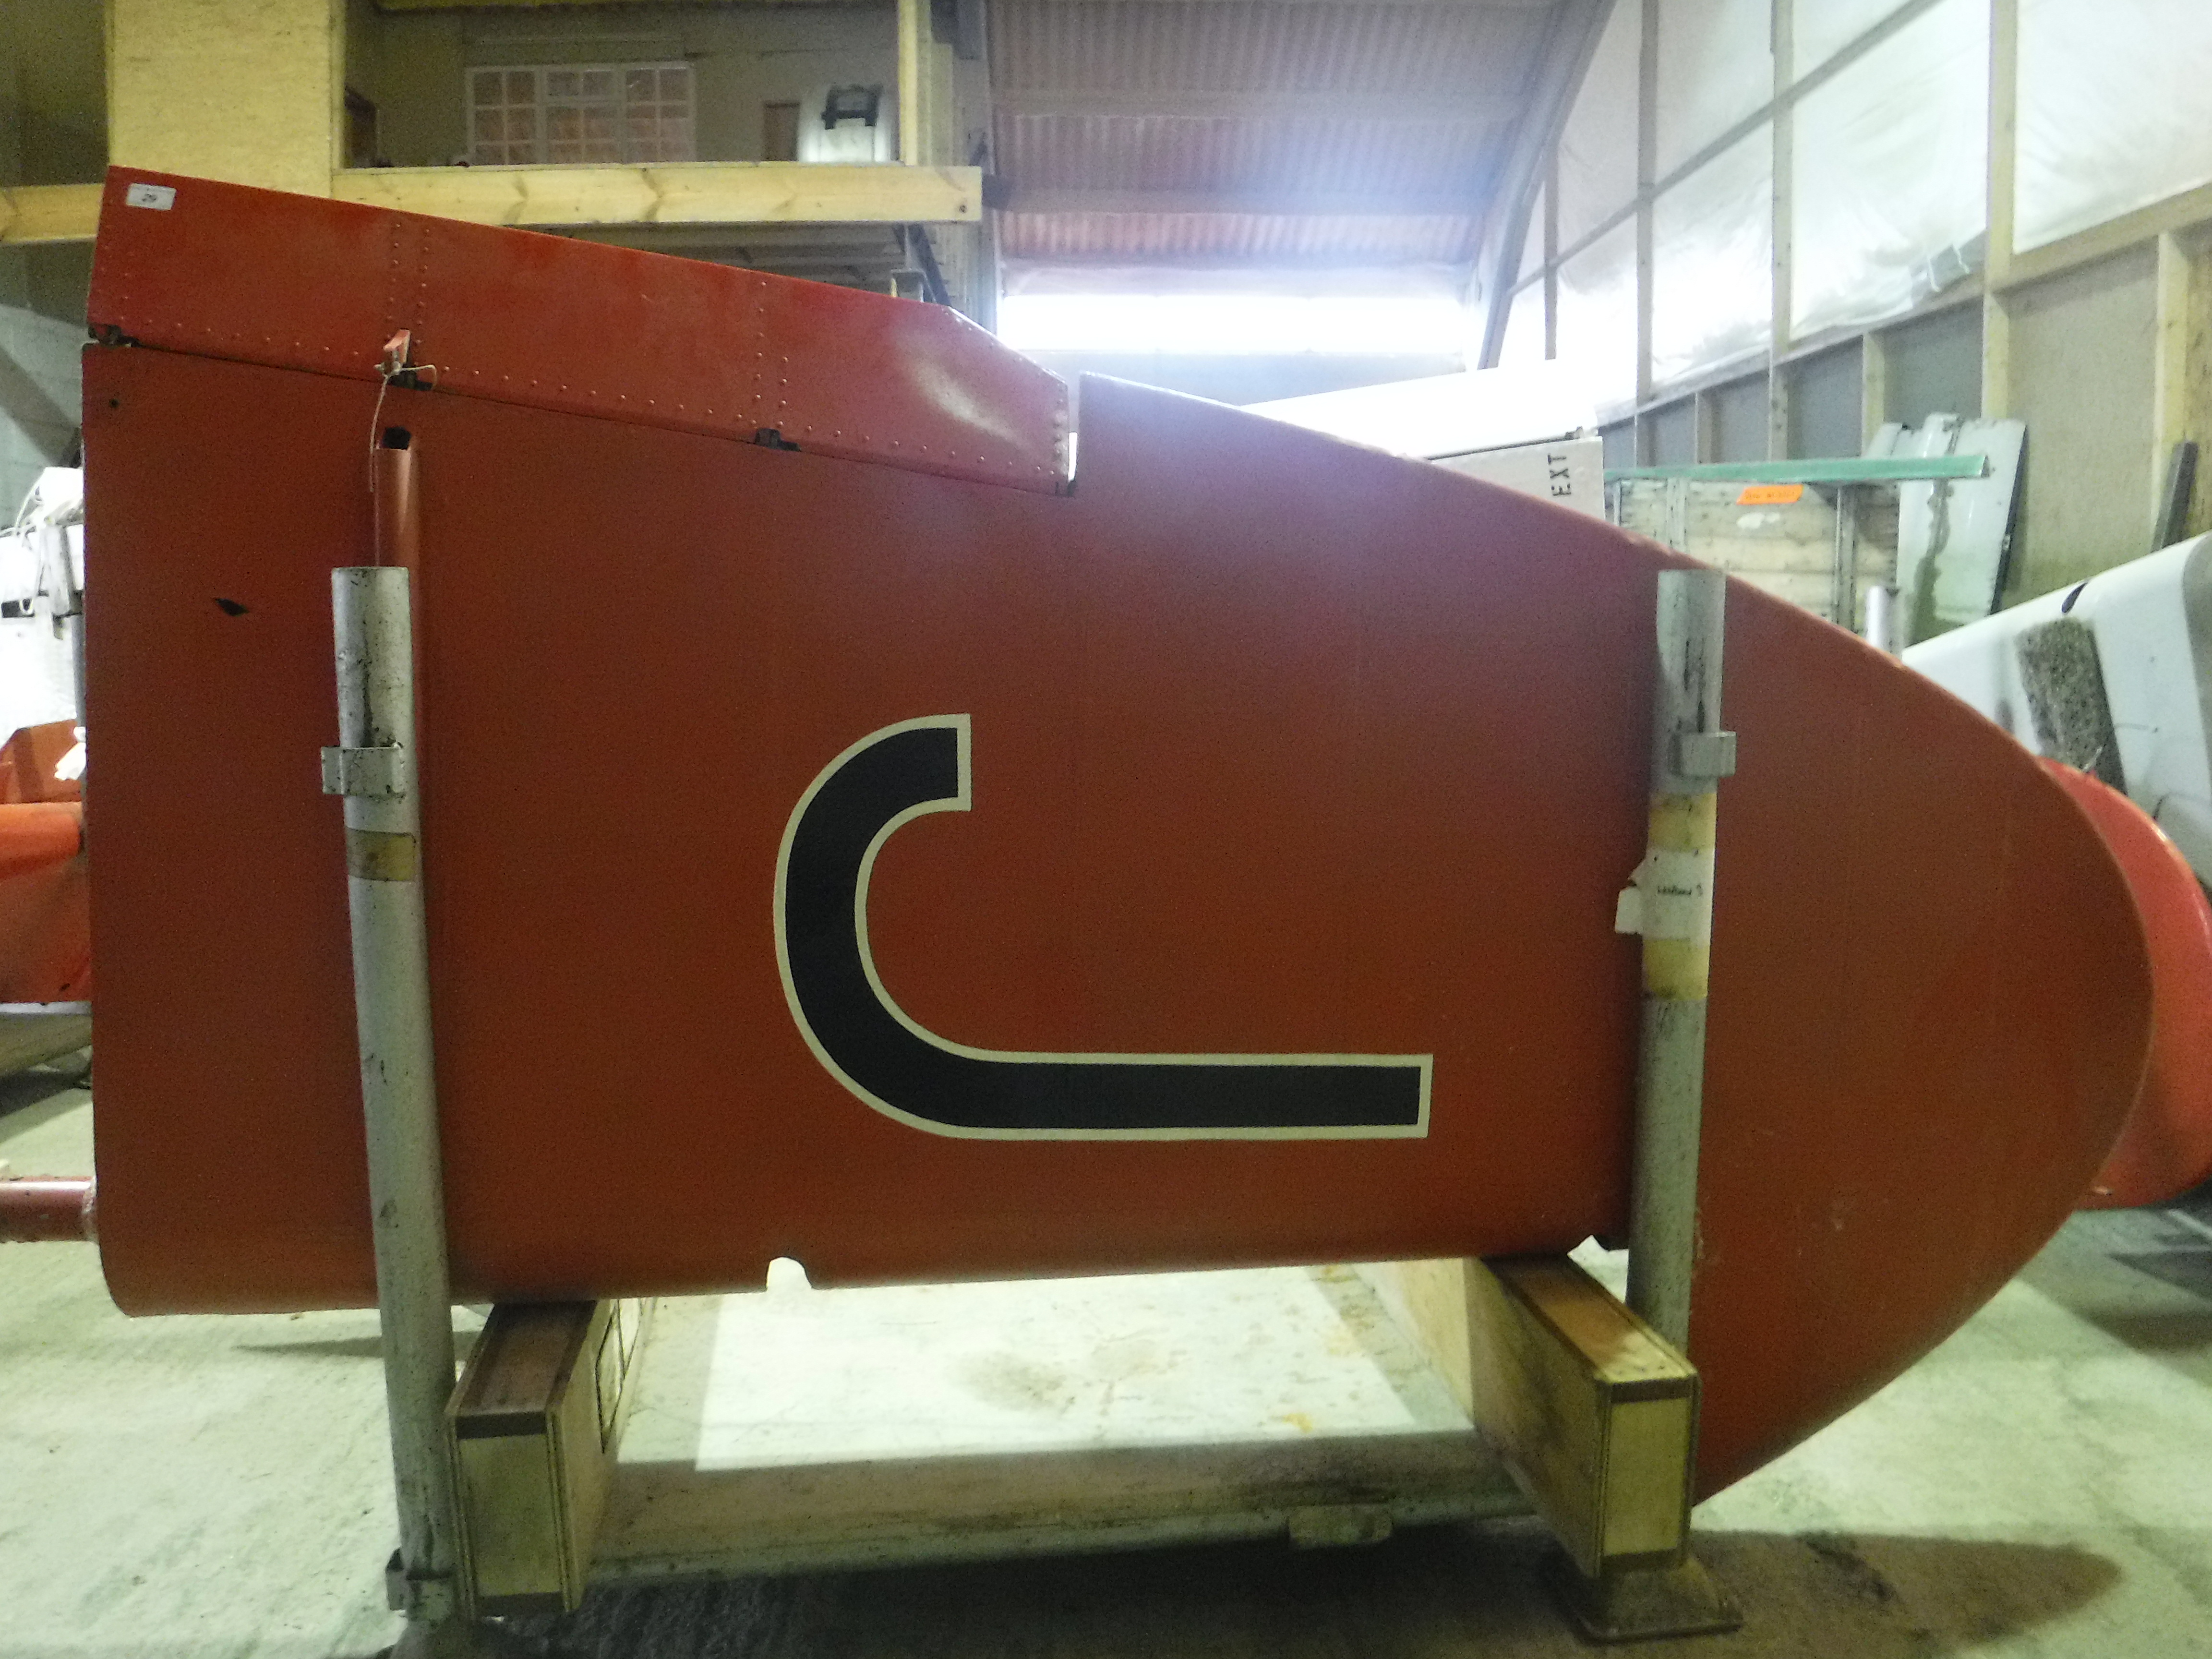 A De Havilland tail fin, red painted, approx 220 cm high, bearing Dove label inscribed "Type No.